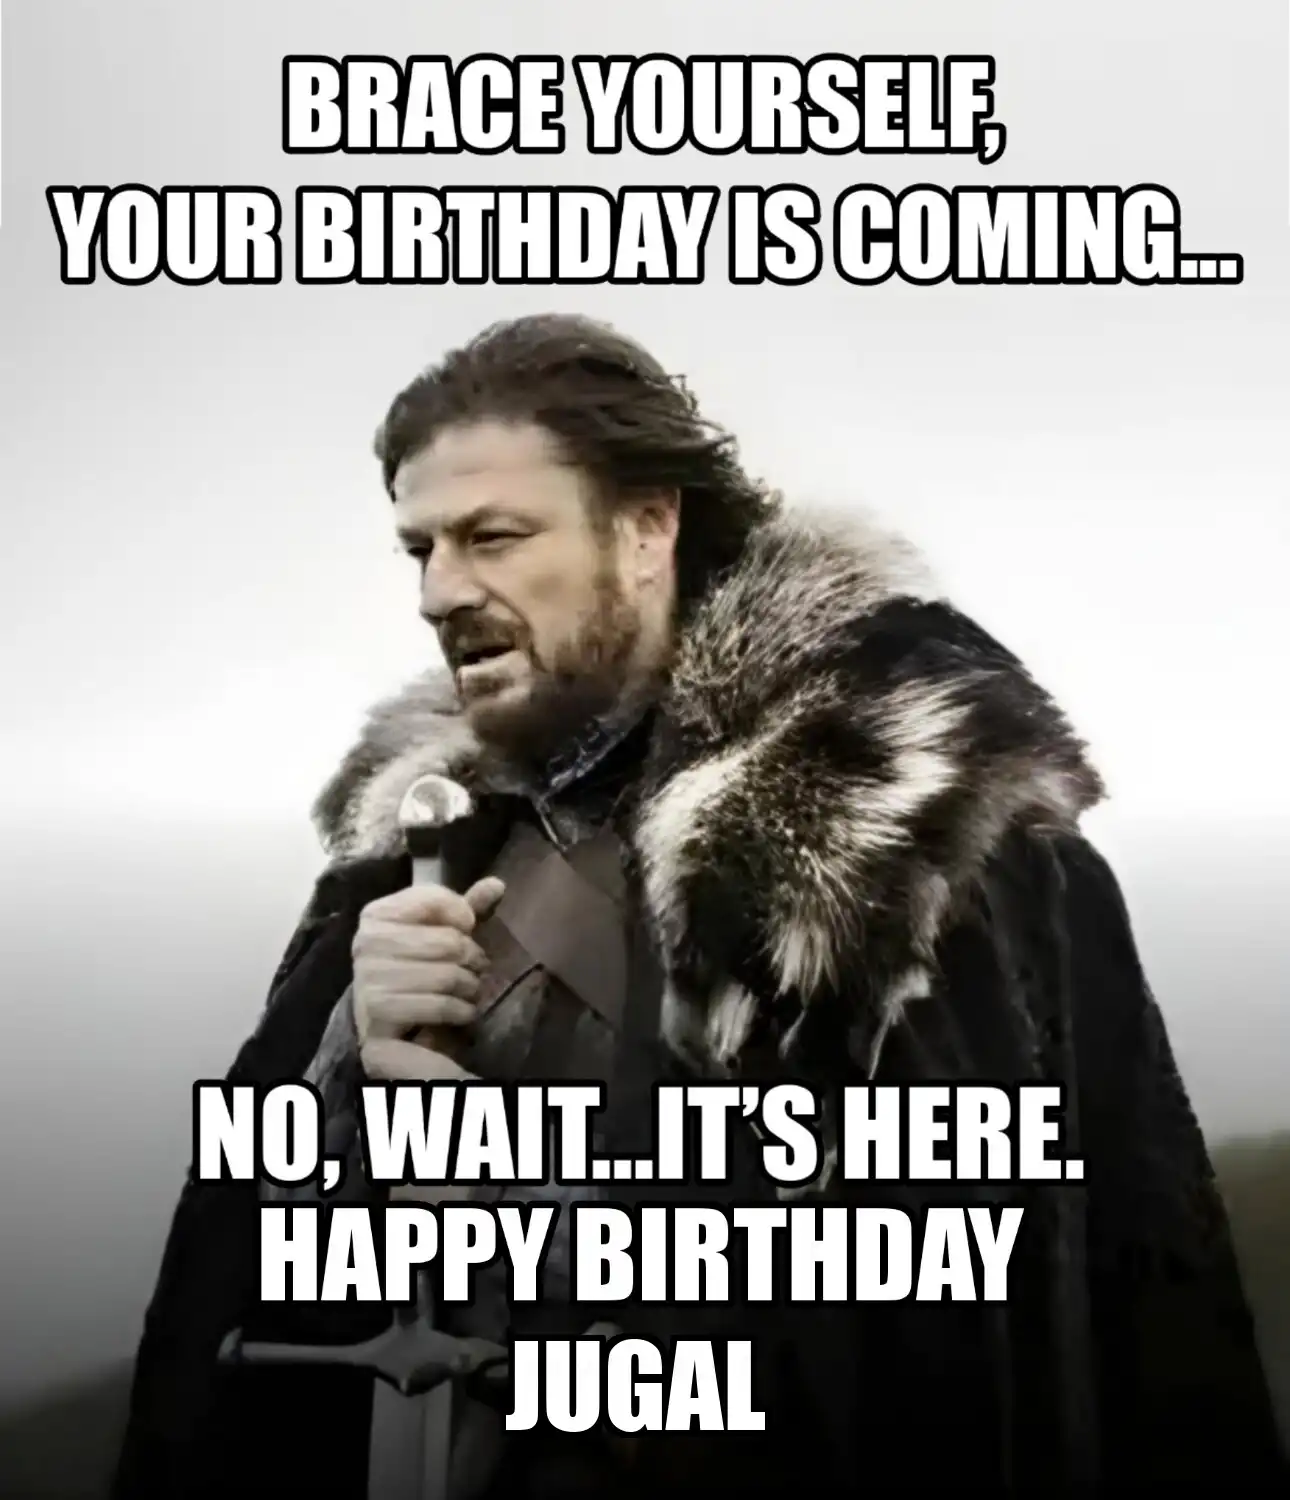 Happy Birthday Jugal Brace Yourself Your Birthday Is Coming Meme